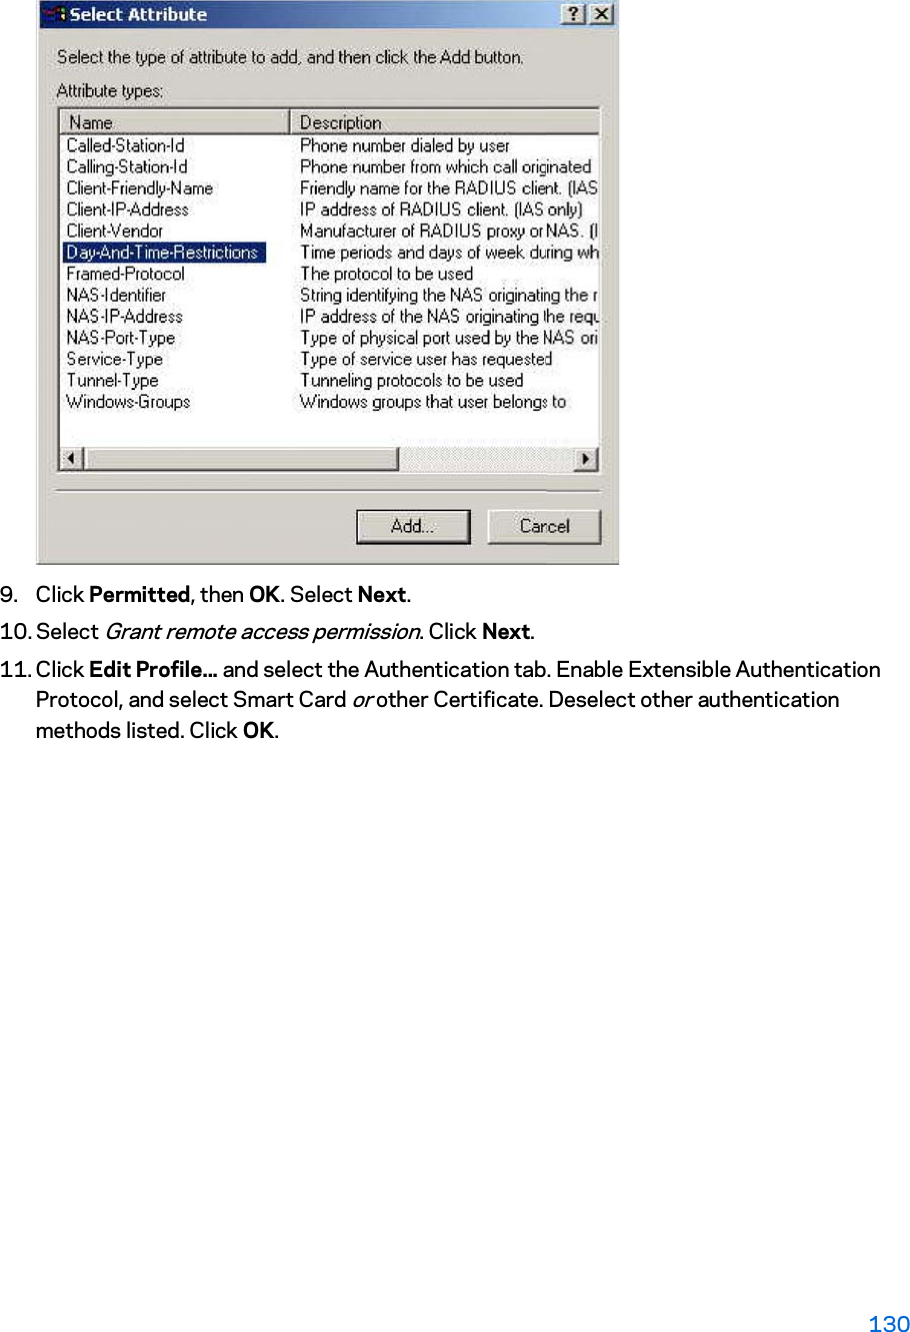 9. Click Permitted, then OK. Select Next.  10. Select Grant remote access permission. Click Next. 11. Click Edit Profile... and select the Authentication tab. Enable Extensible Authentication Protocol, and select Smart Card or other Certificate. Deselect other authentication methods listed. Click OK.  130